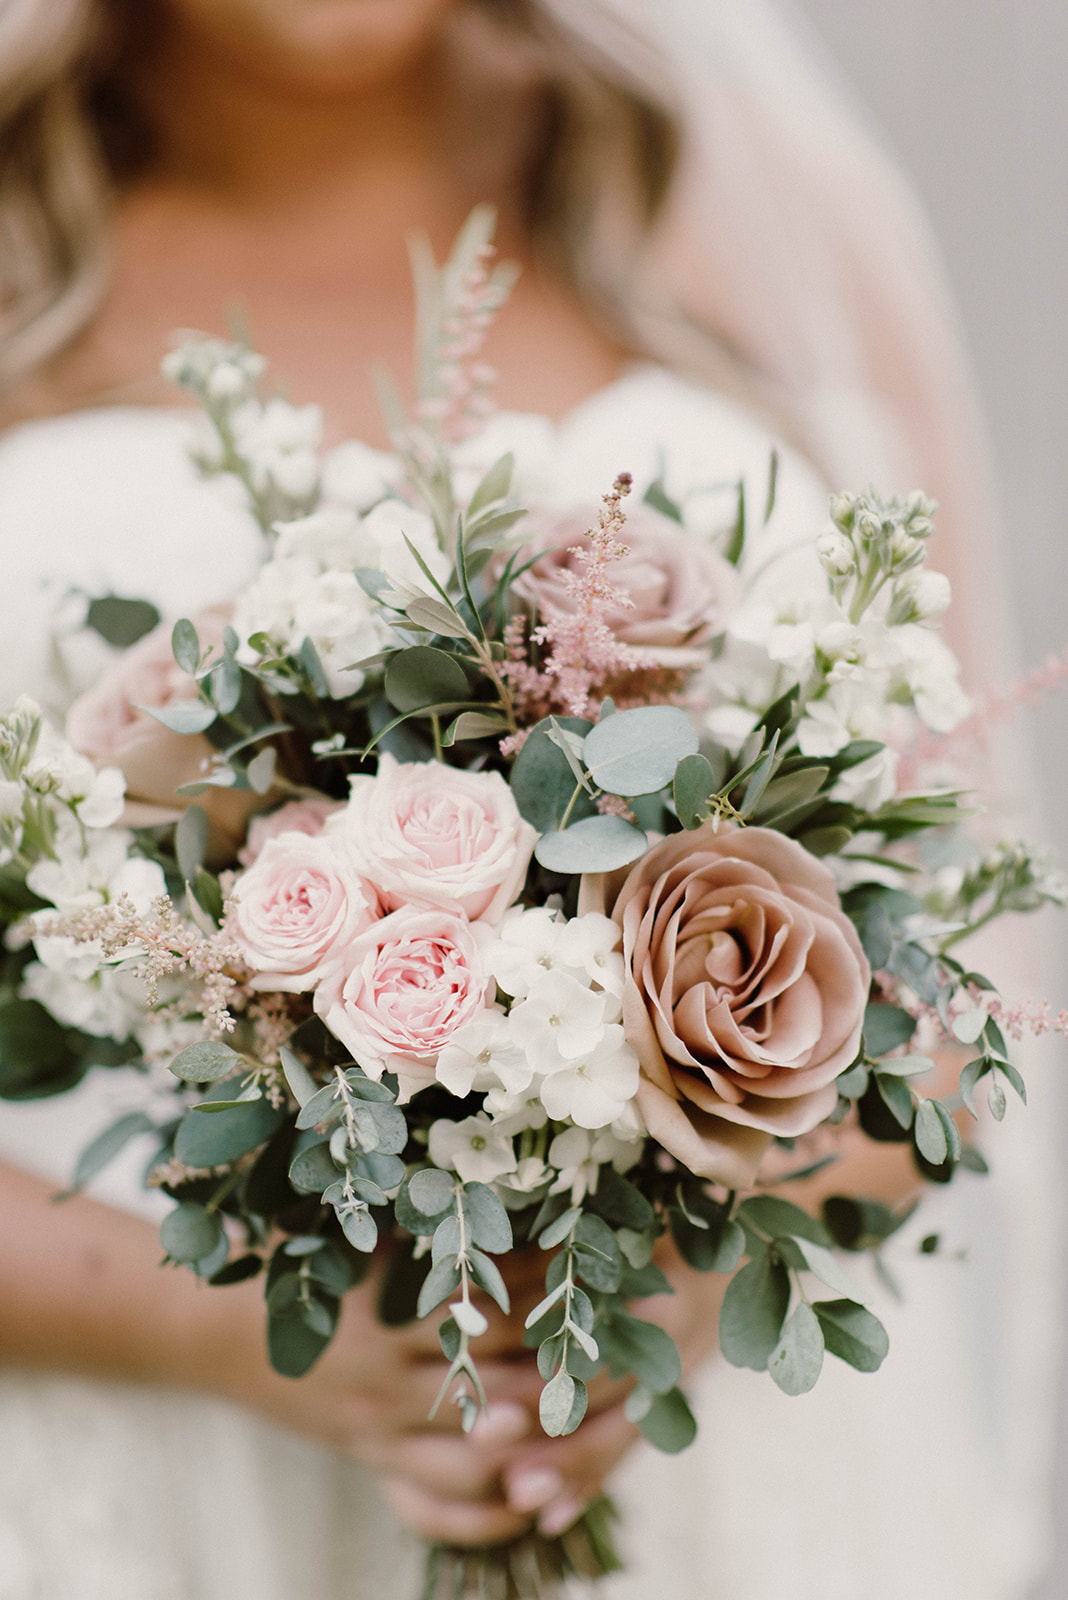 Floral-Reef-Designs-Ottawa-Wedding-and-Event-Florist-At-the-Schoolhouse-Wedding-2020-Rosielle-and-Co-Paige-Jamie-Wedding-174